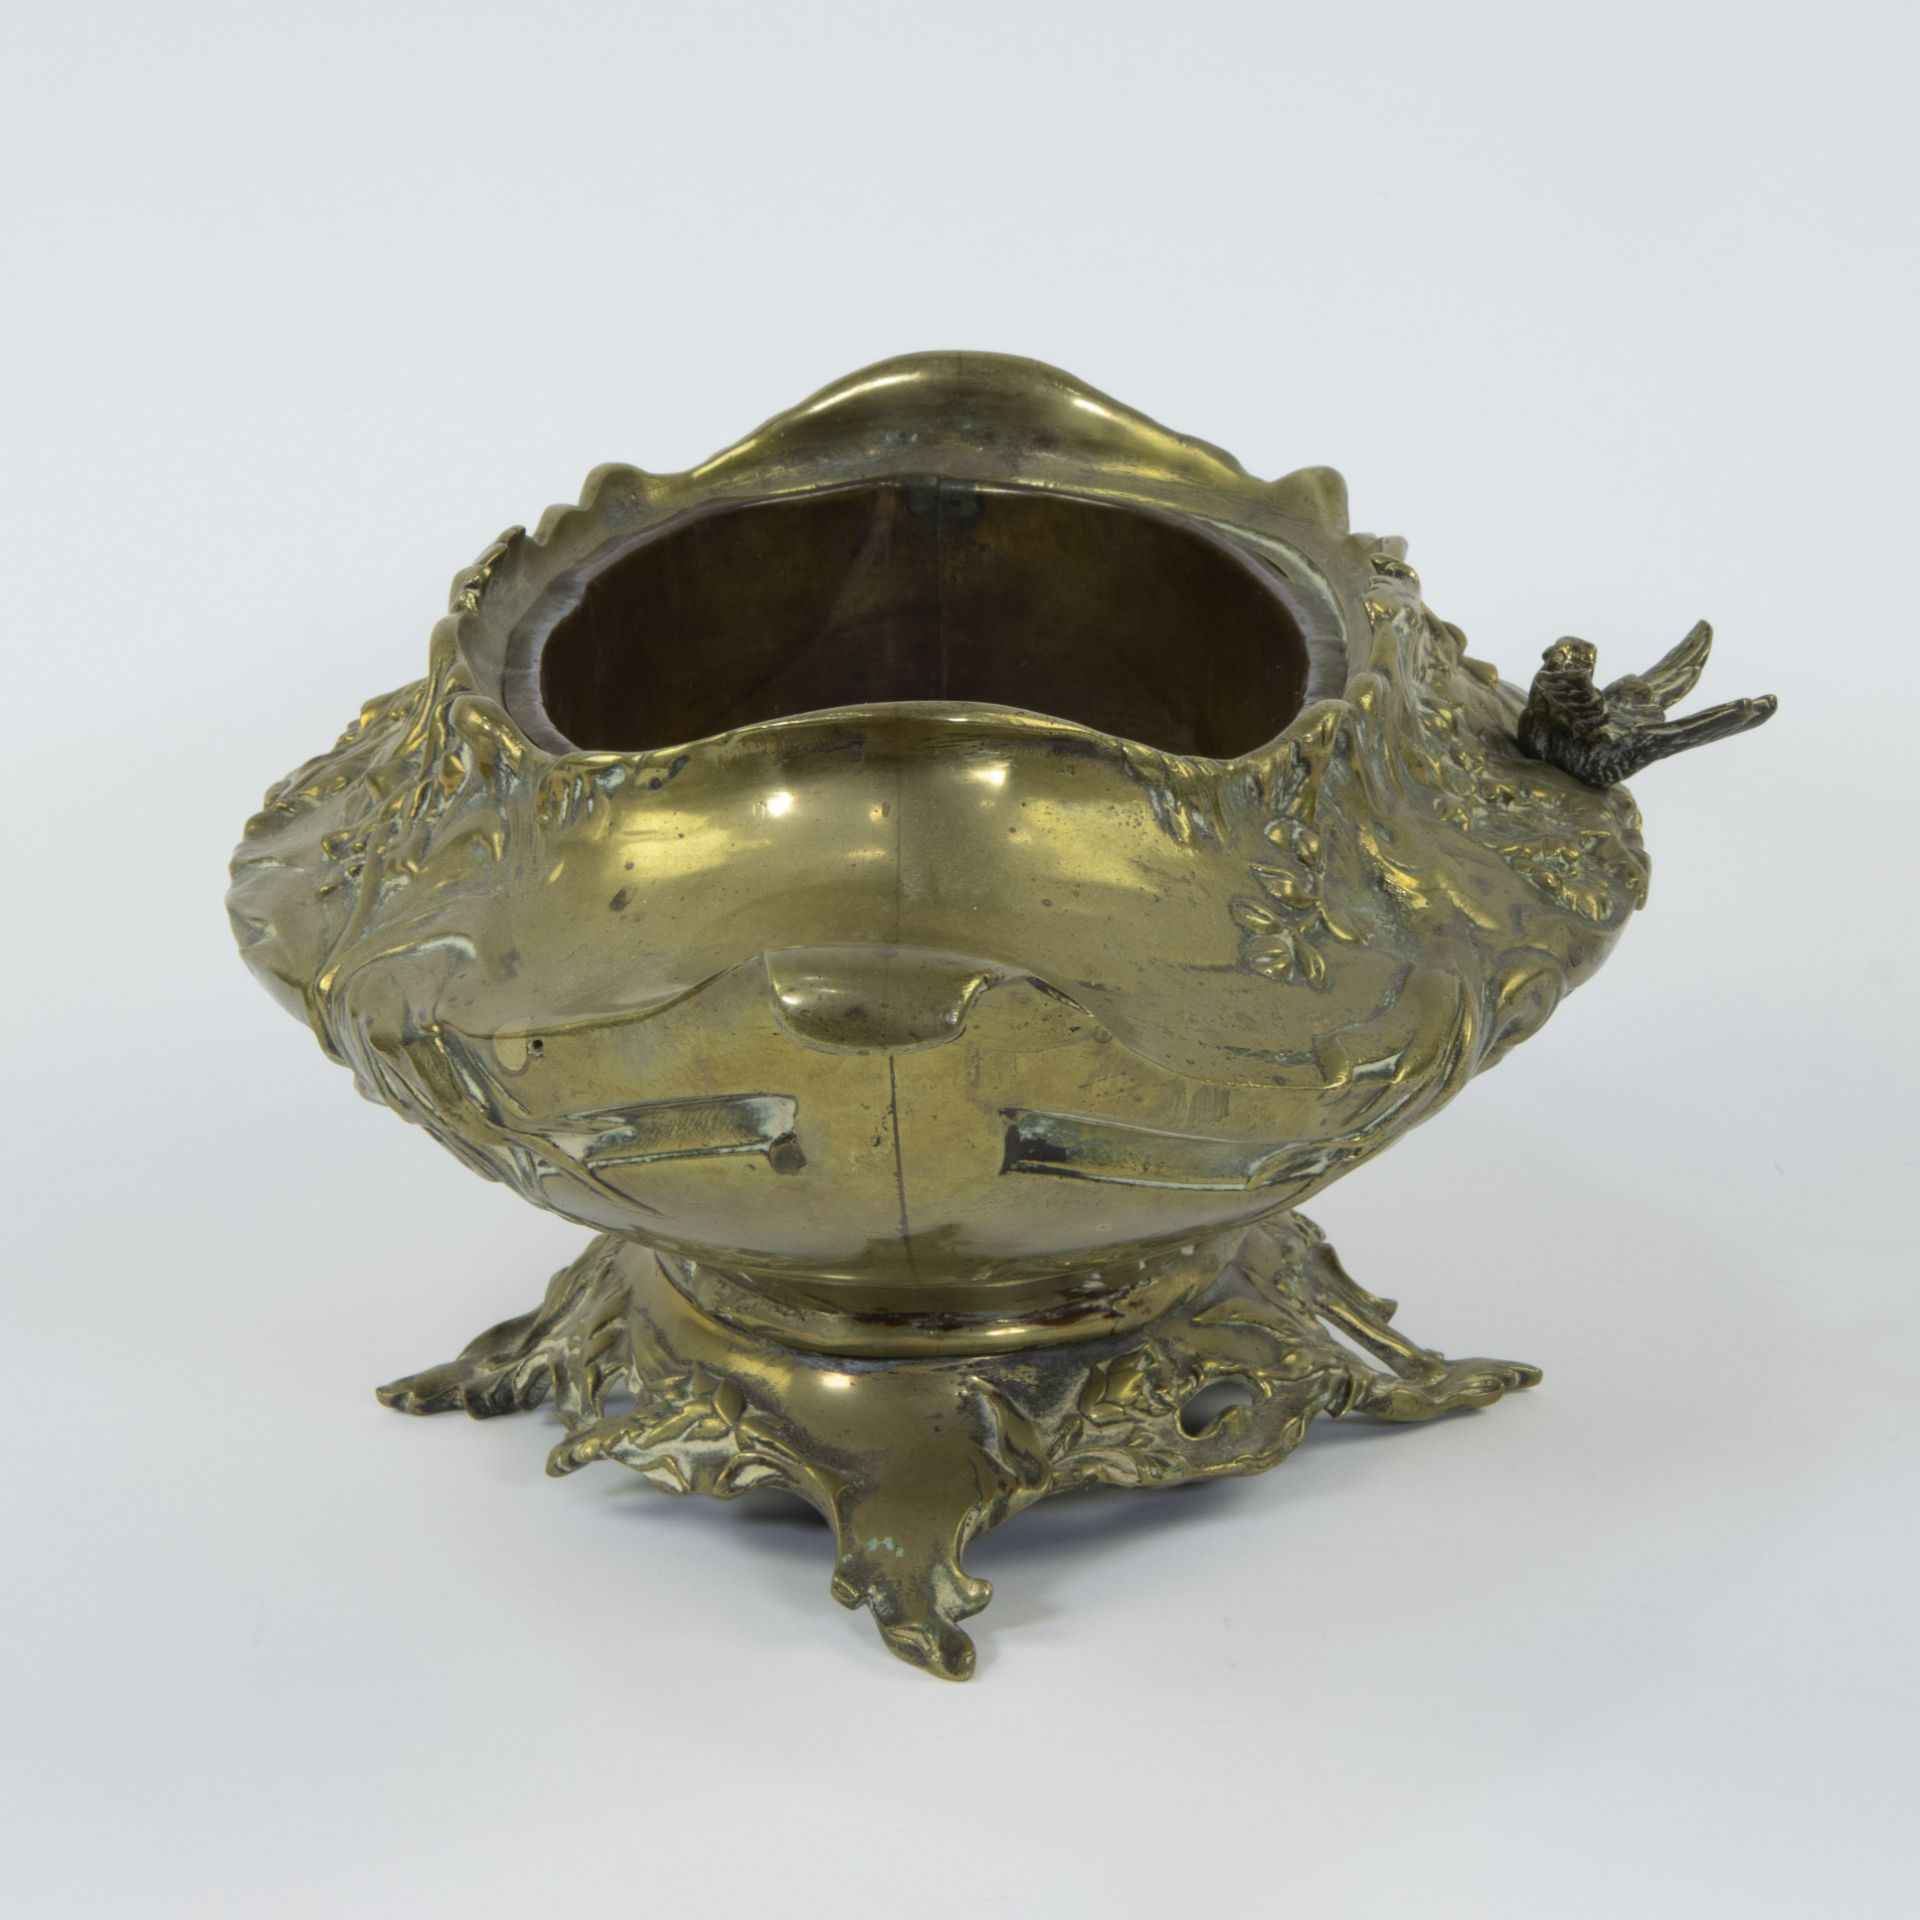 Jardinière in gilt brass decorated with floral motifs and a bird, circa 1920 - Image 2 of 4